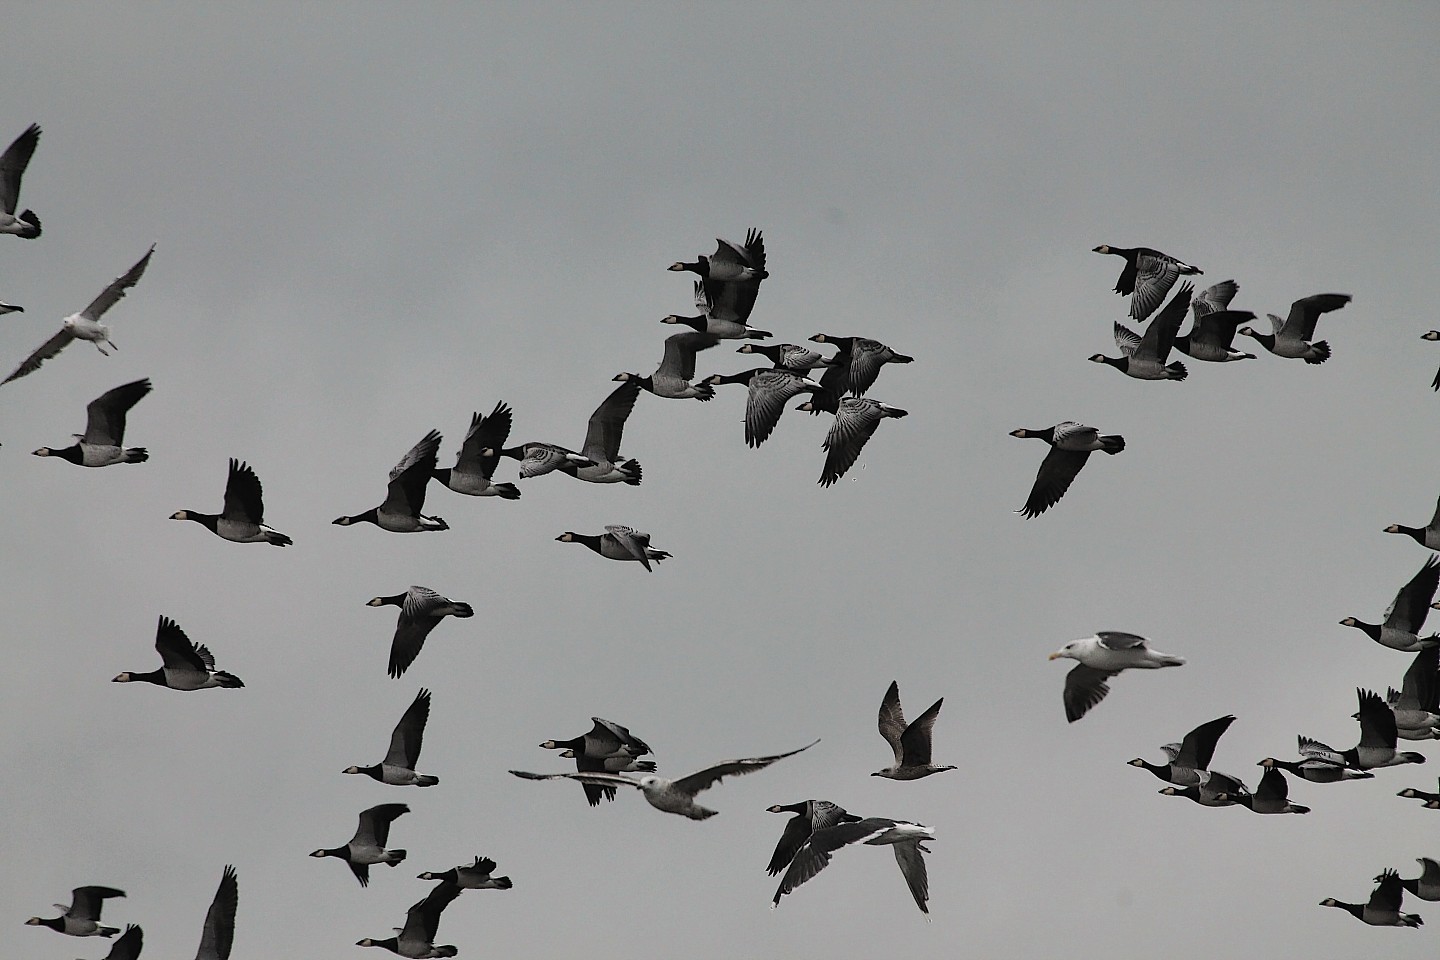 Barnacle Geese have arrived in record numbers